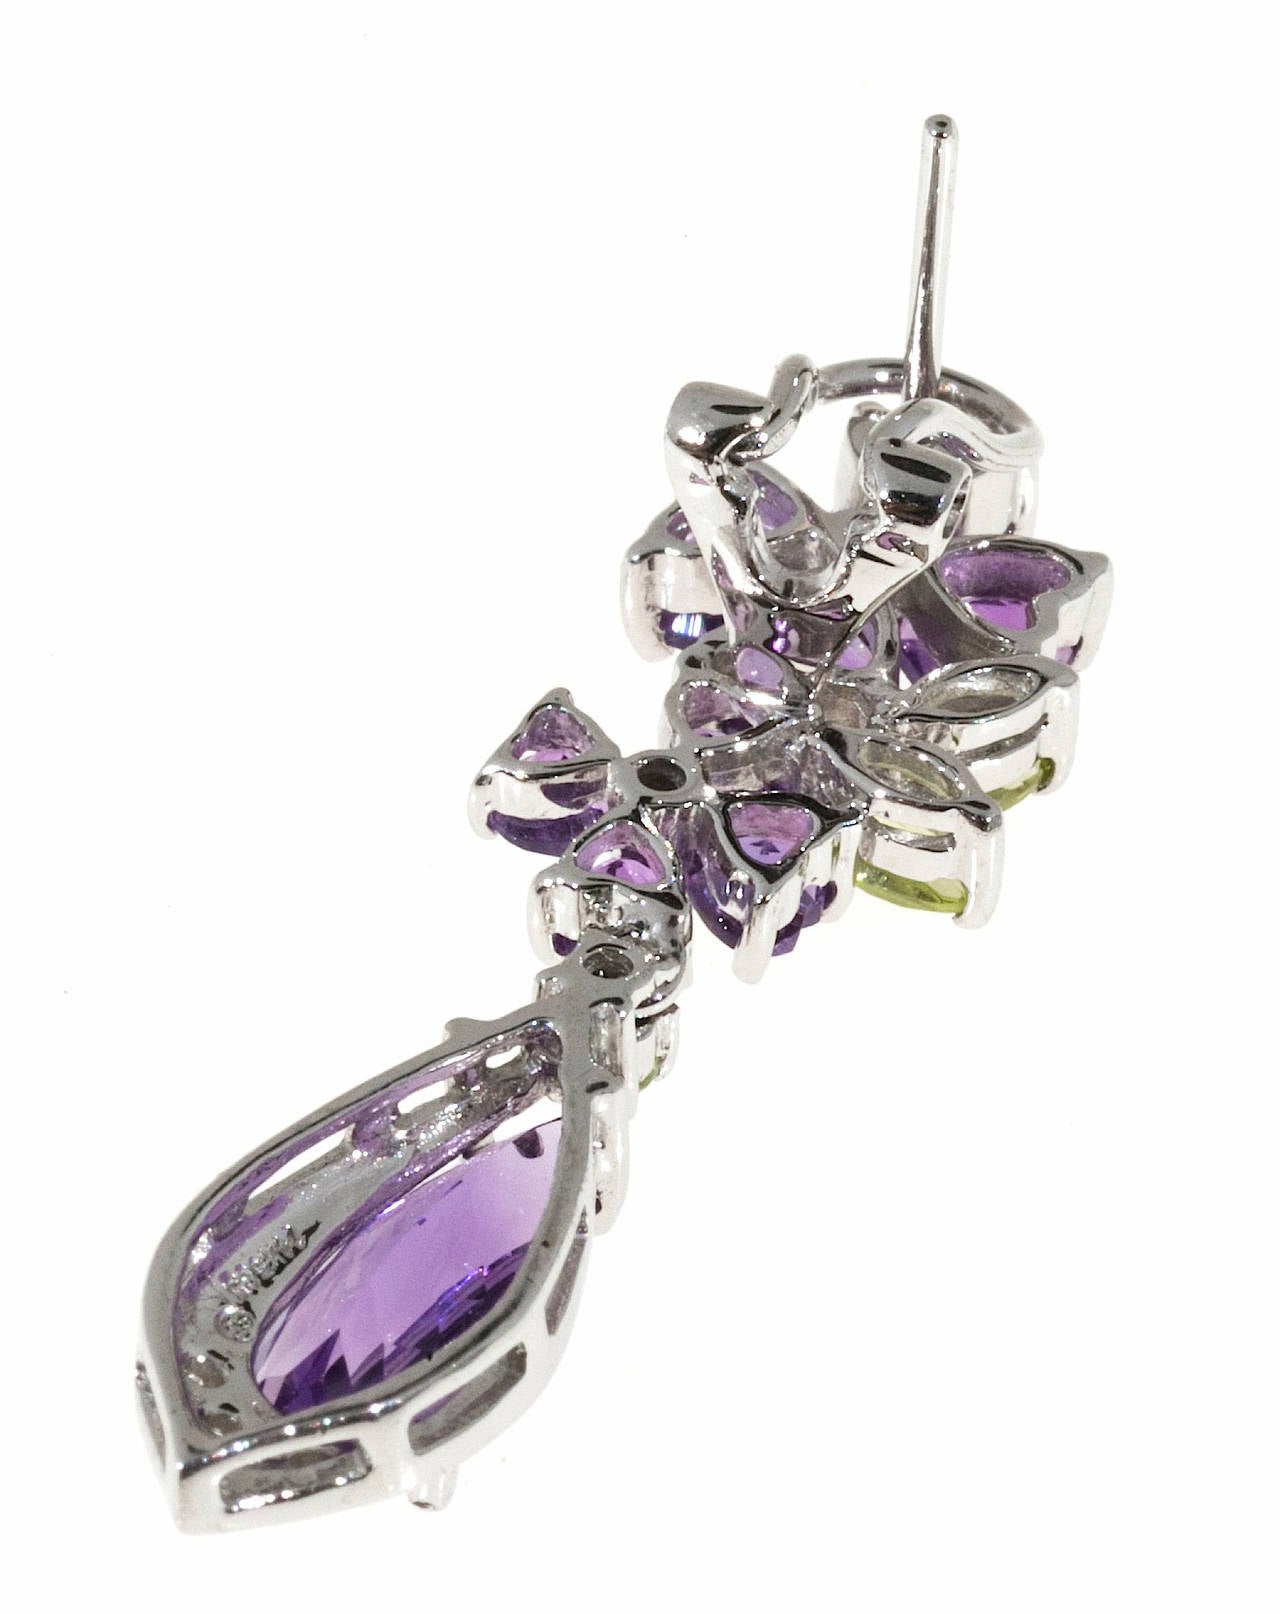 14k white gold dangle earrings with bright purple Amethyst, light green Peridot and diamonds.

18 genuine Amethyst, approx. total weight 3.75cts
14 single cut diamonds, approx. total weight .06cts, H, SI
6 Peridot, approx. total weight